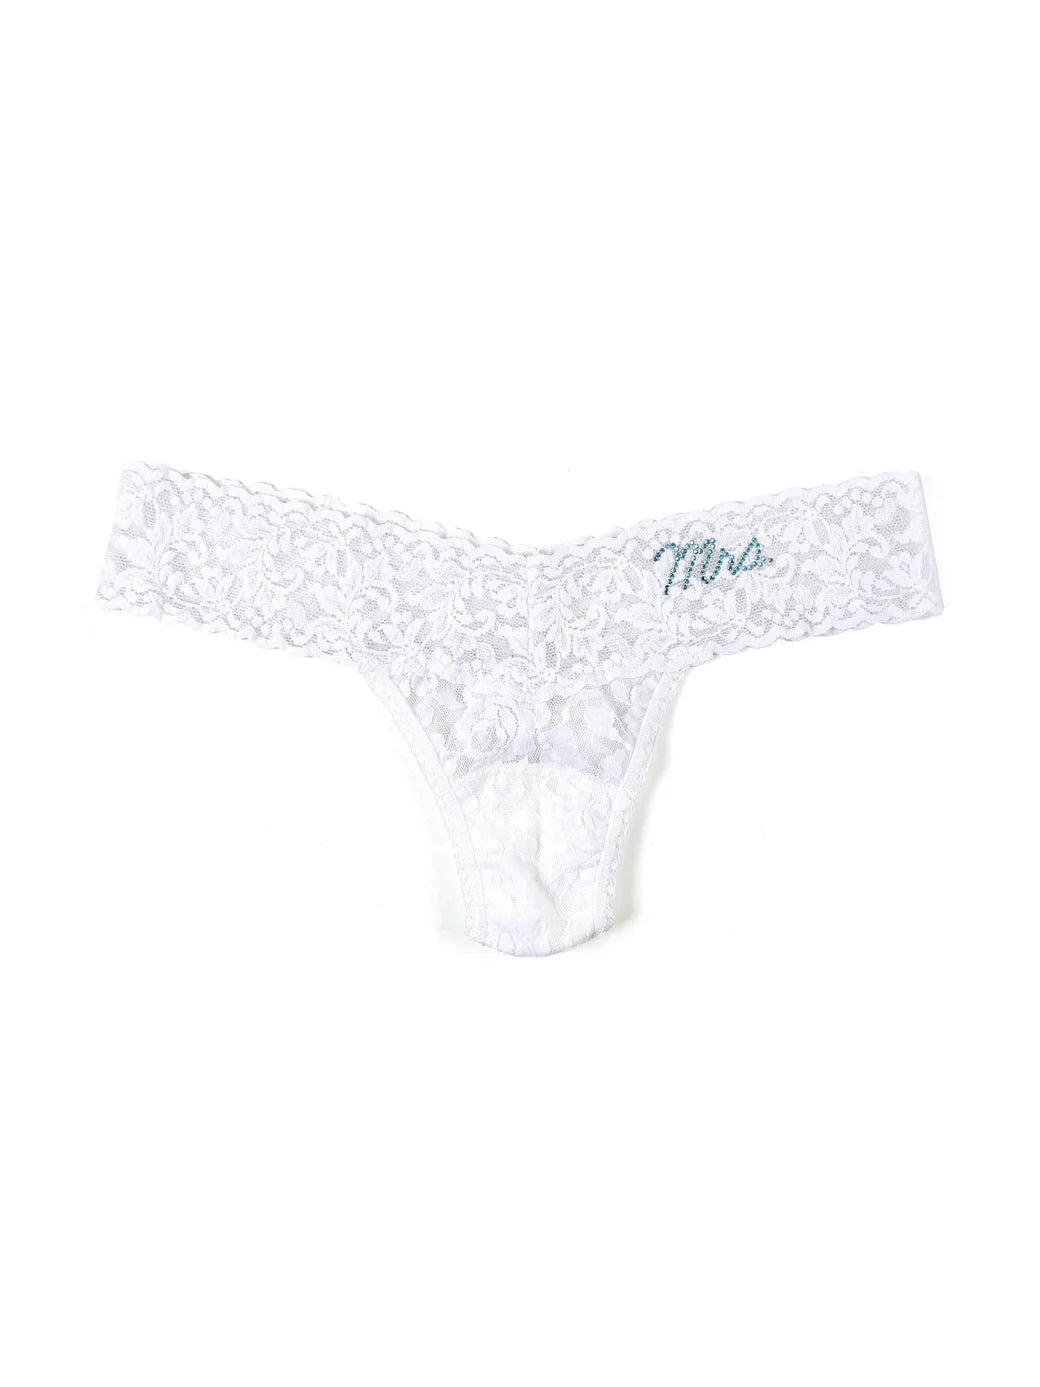 Mrs. Low Rise Signature Lace Thong In White - Hanky Panky